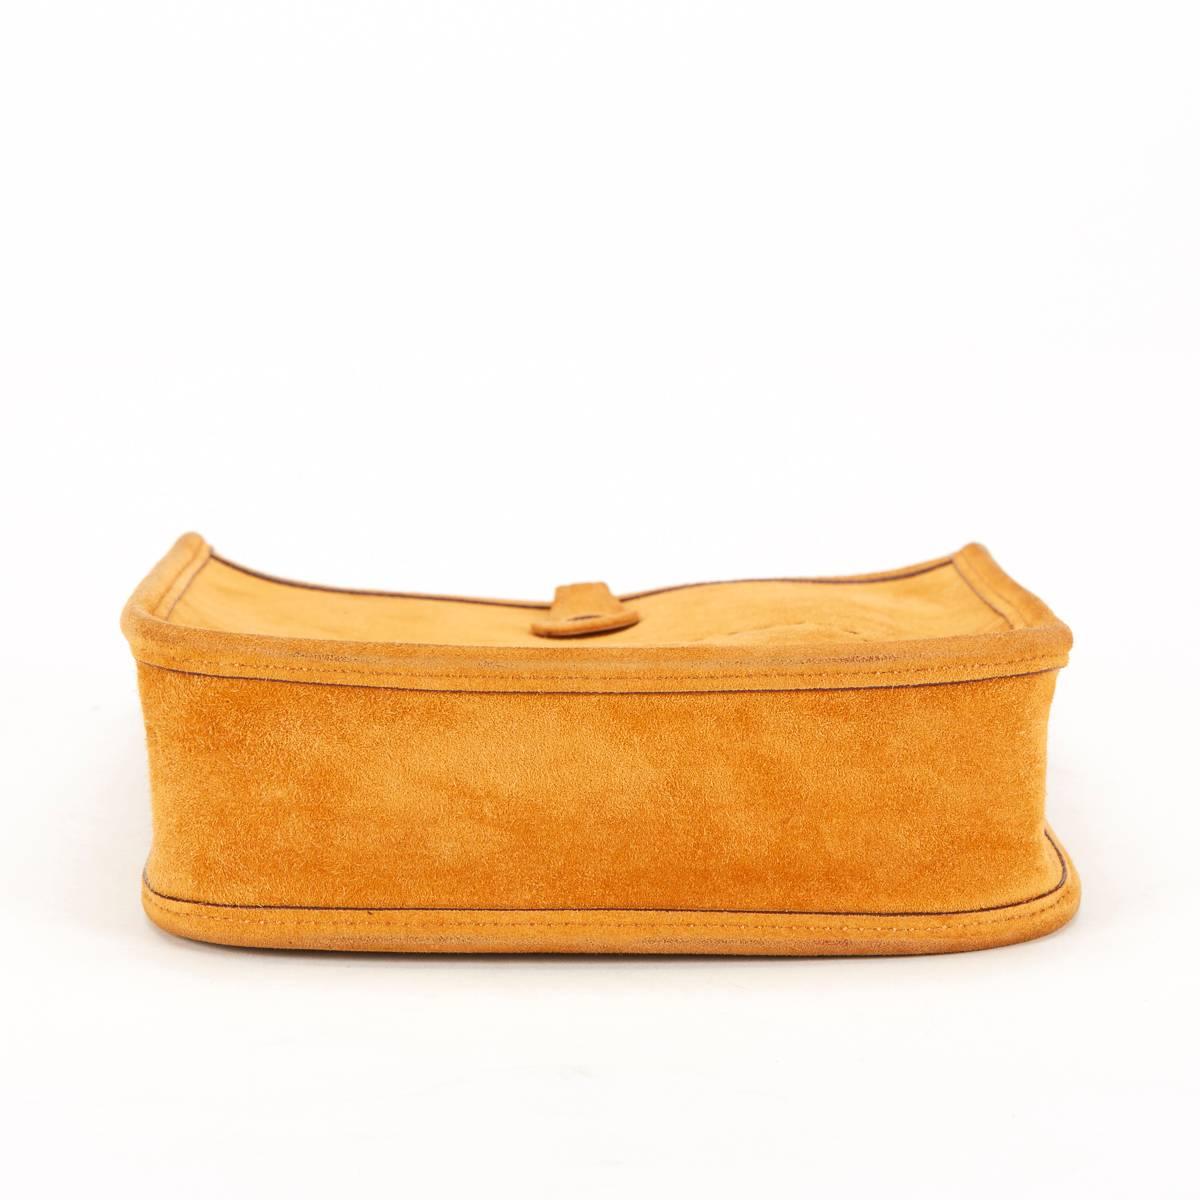 2005 Hermes Mustard Yellow Suede Evelyne TPM 3